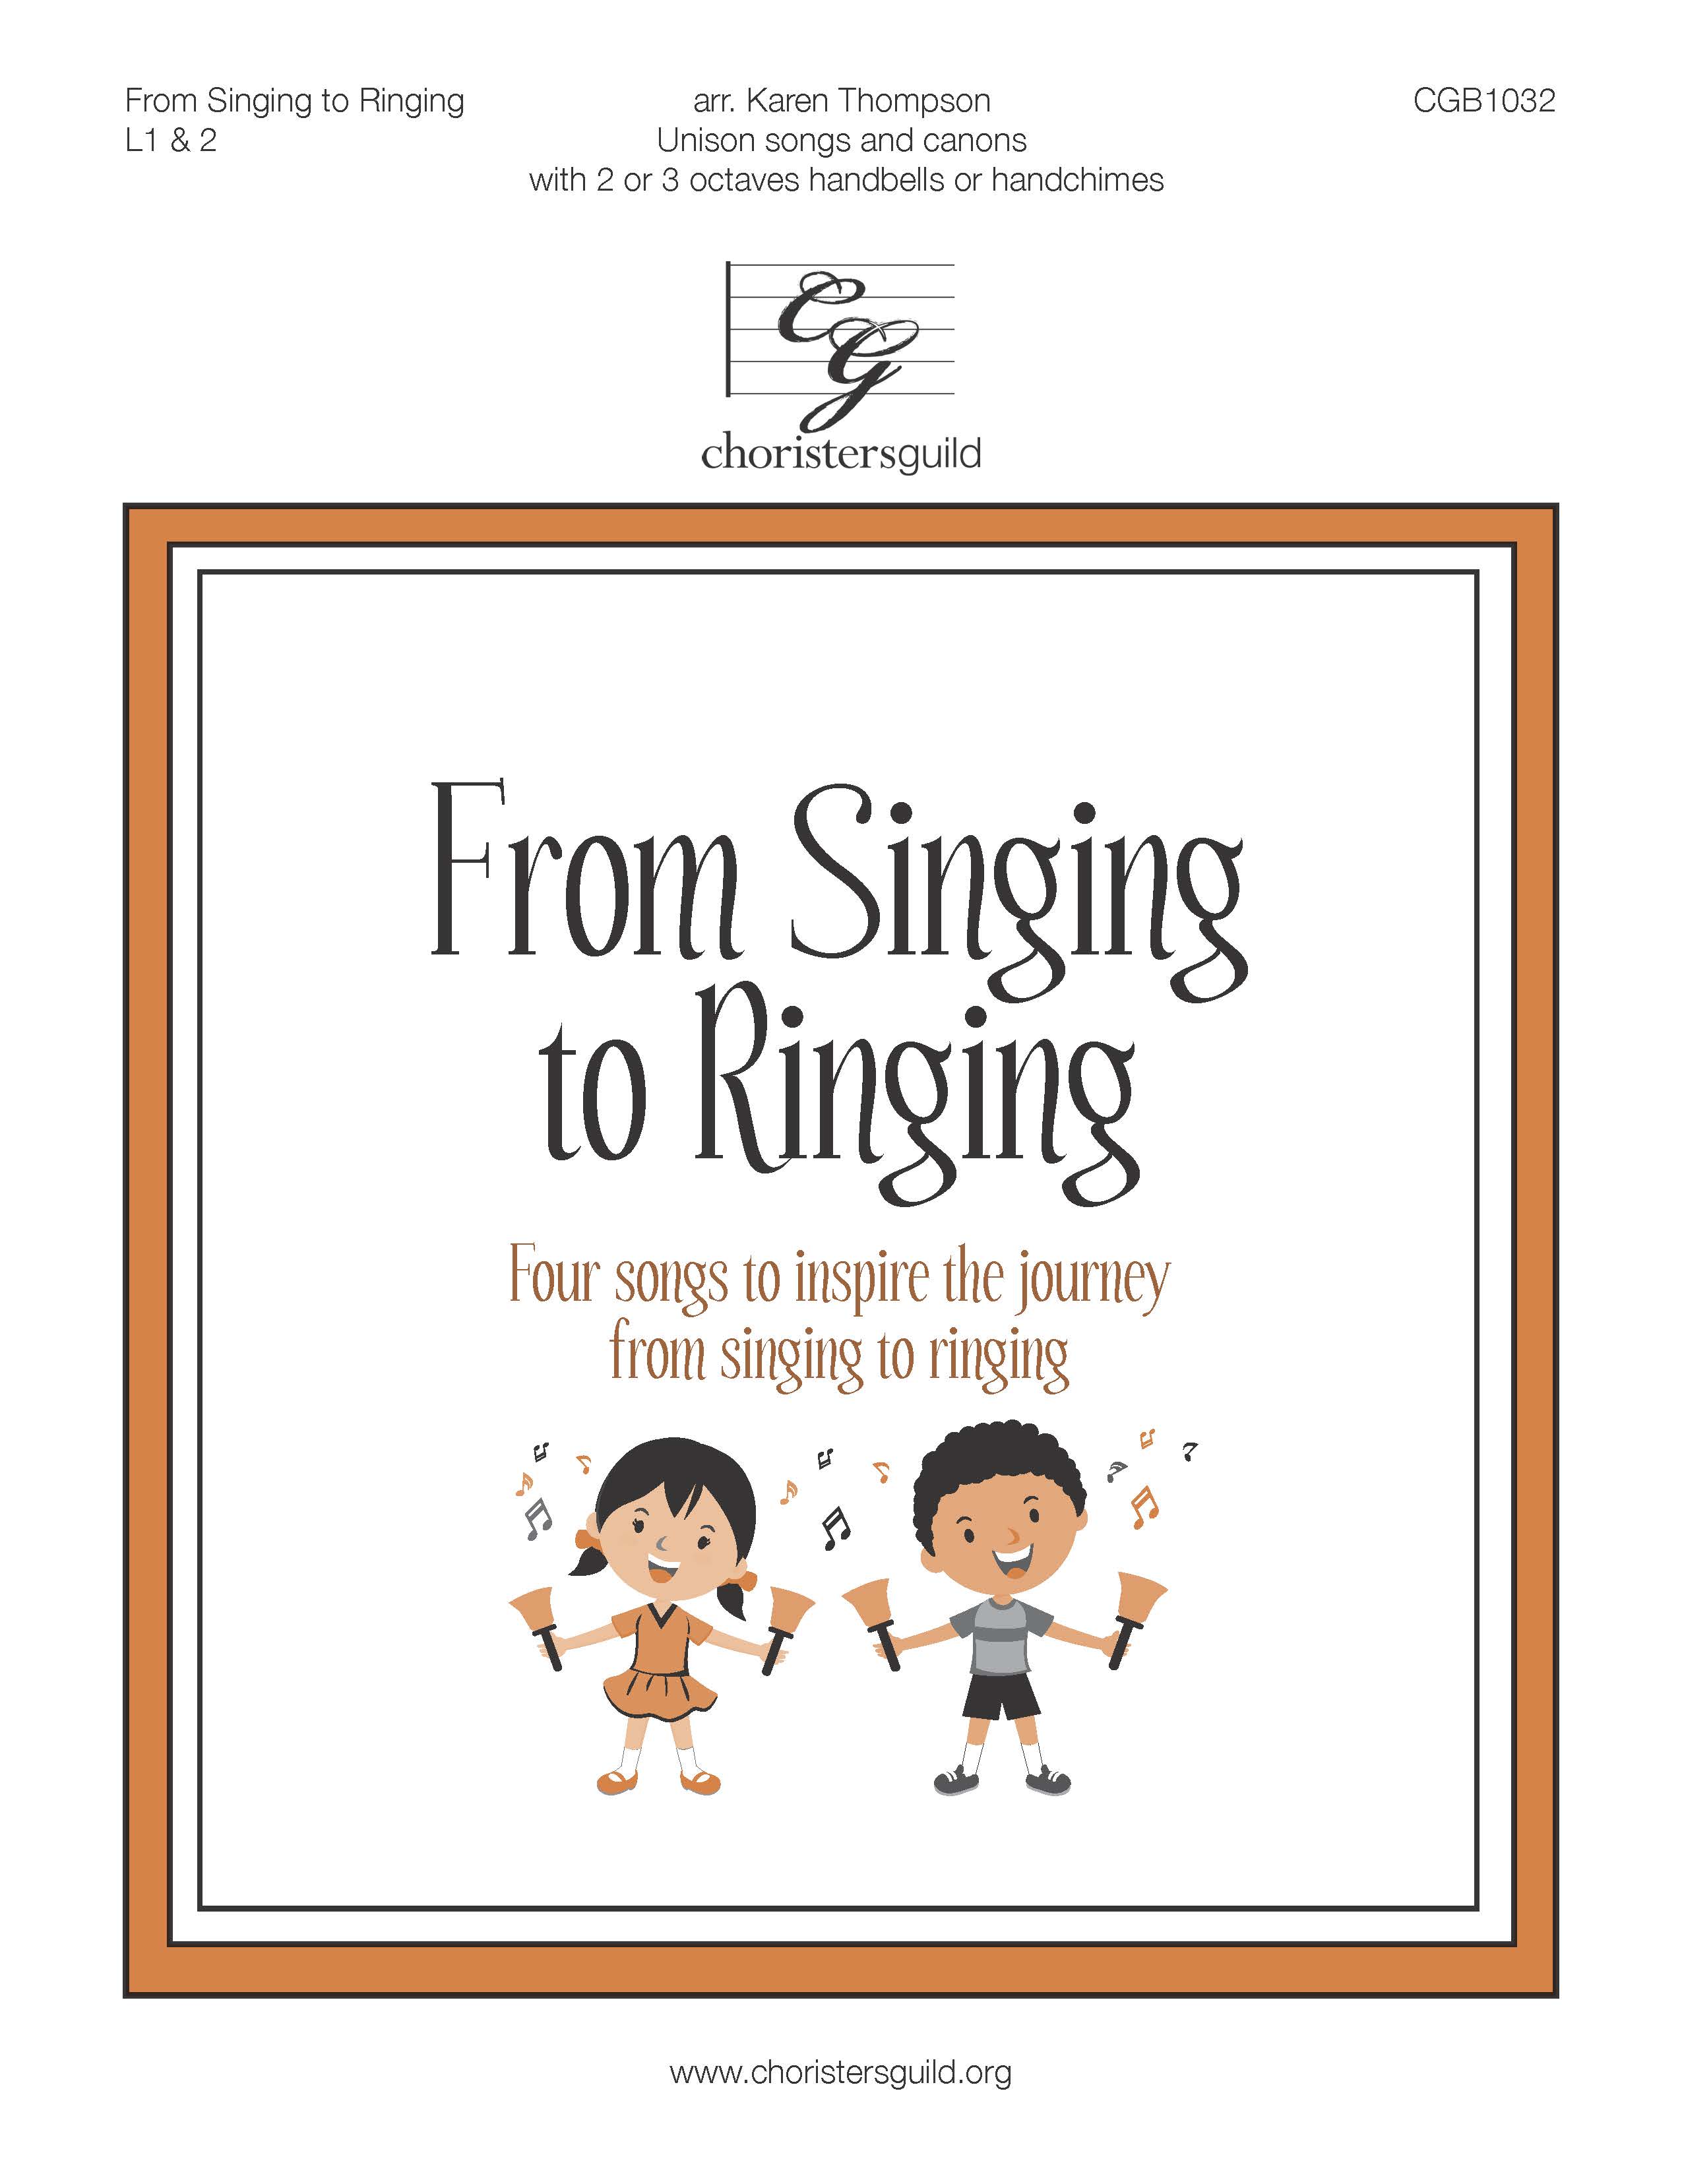 From Singing to Ringing